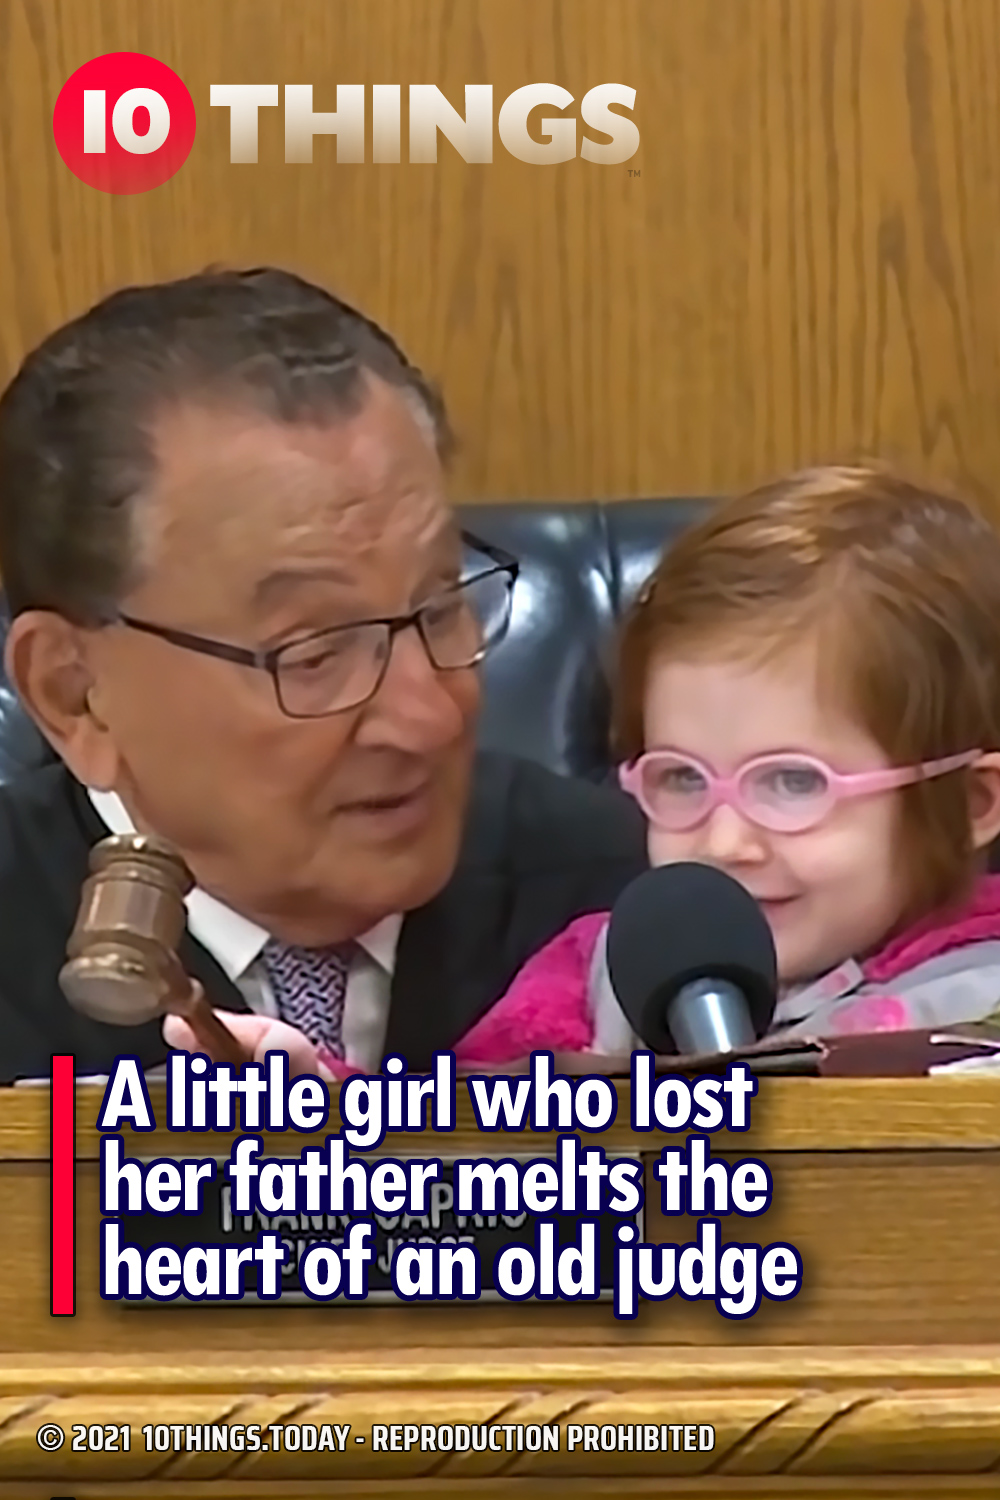 A little girl who lost her father melts the heart of an old judge